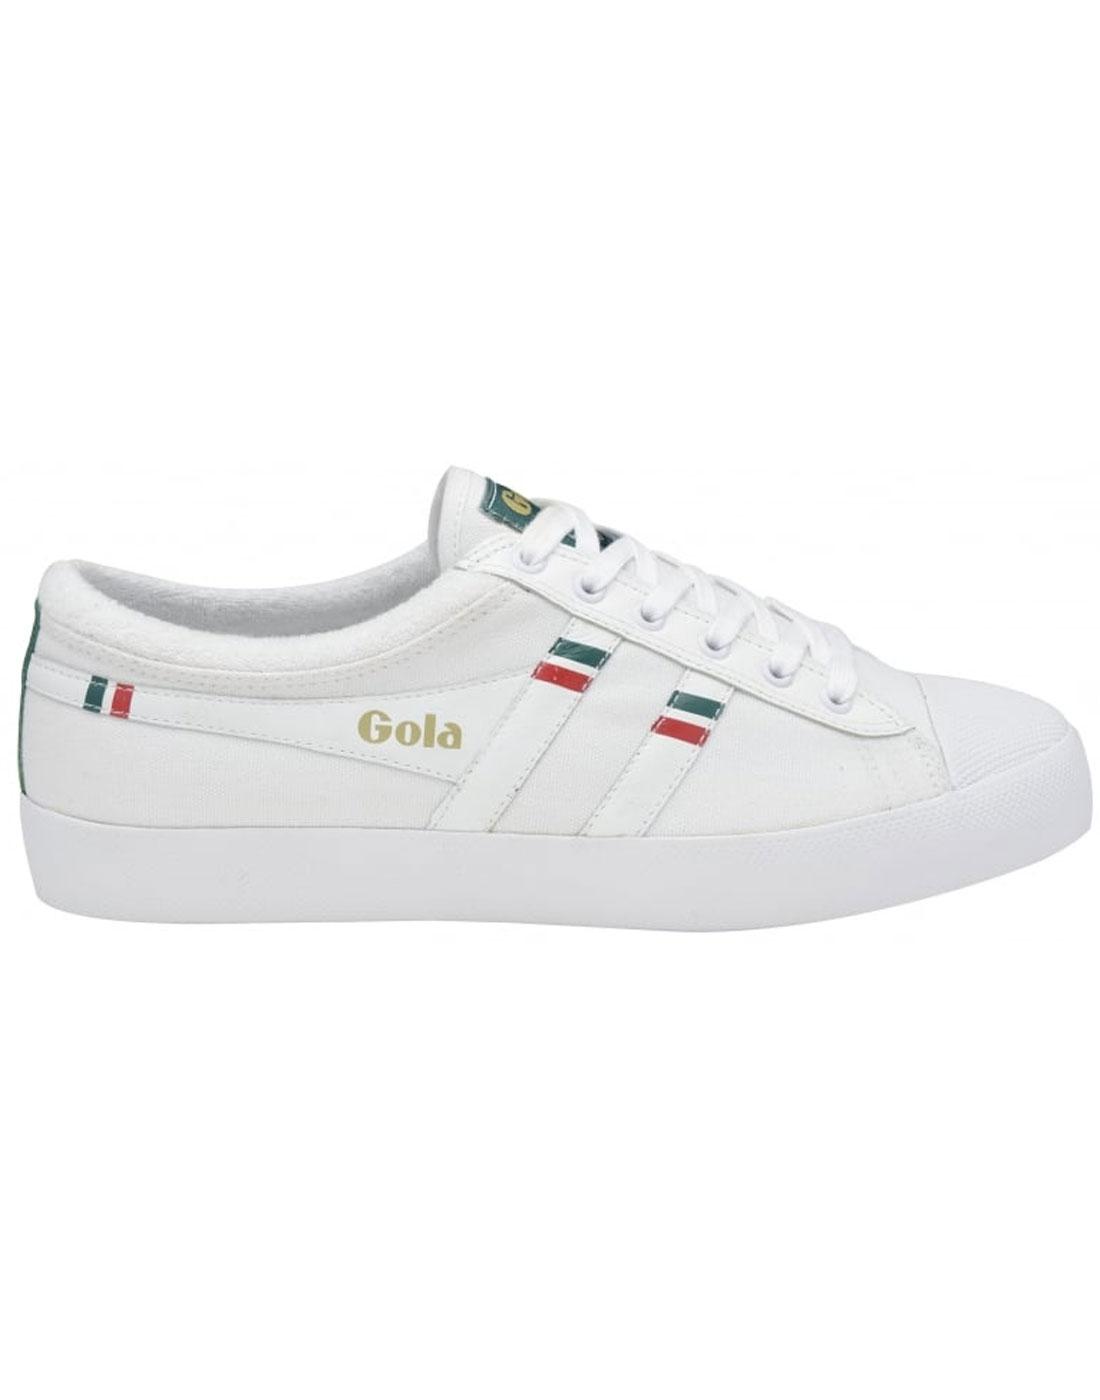 Trainers GOLA Women's Lawn Sports White Canvas Sneakers UK 5 6